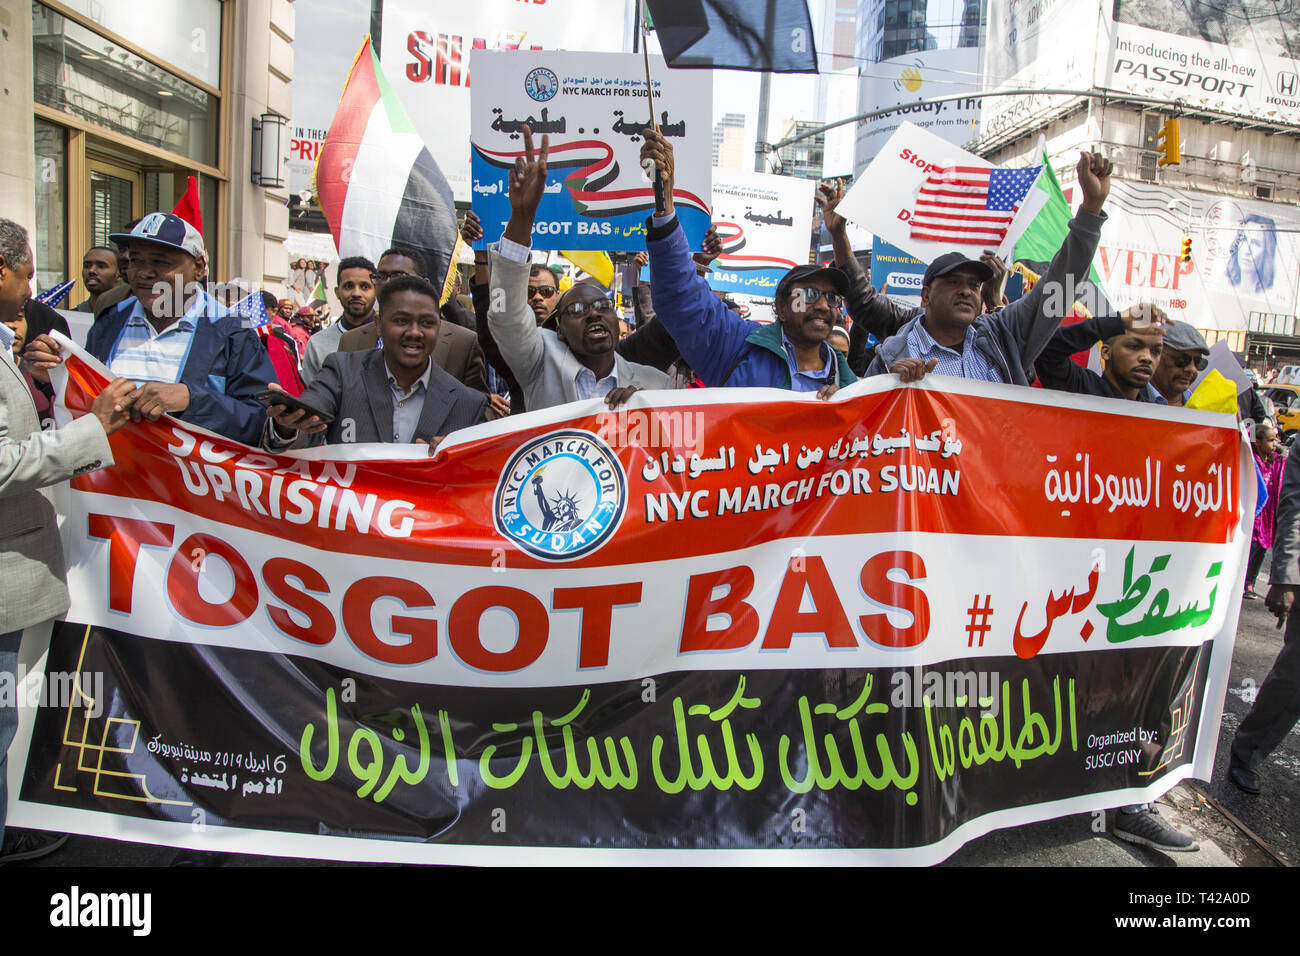 4/6/19: Days before Sudan's dictatorial president Omar al-Bashir was forced from office by a military coup, Sudanese Americans and immigrants demonstrate and march to the UN in NY City to have Bashir resign immediately from office and have democracy restored i9n Sudan. Stock Photo